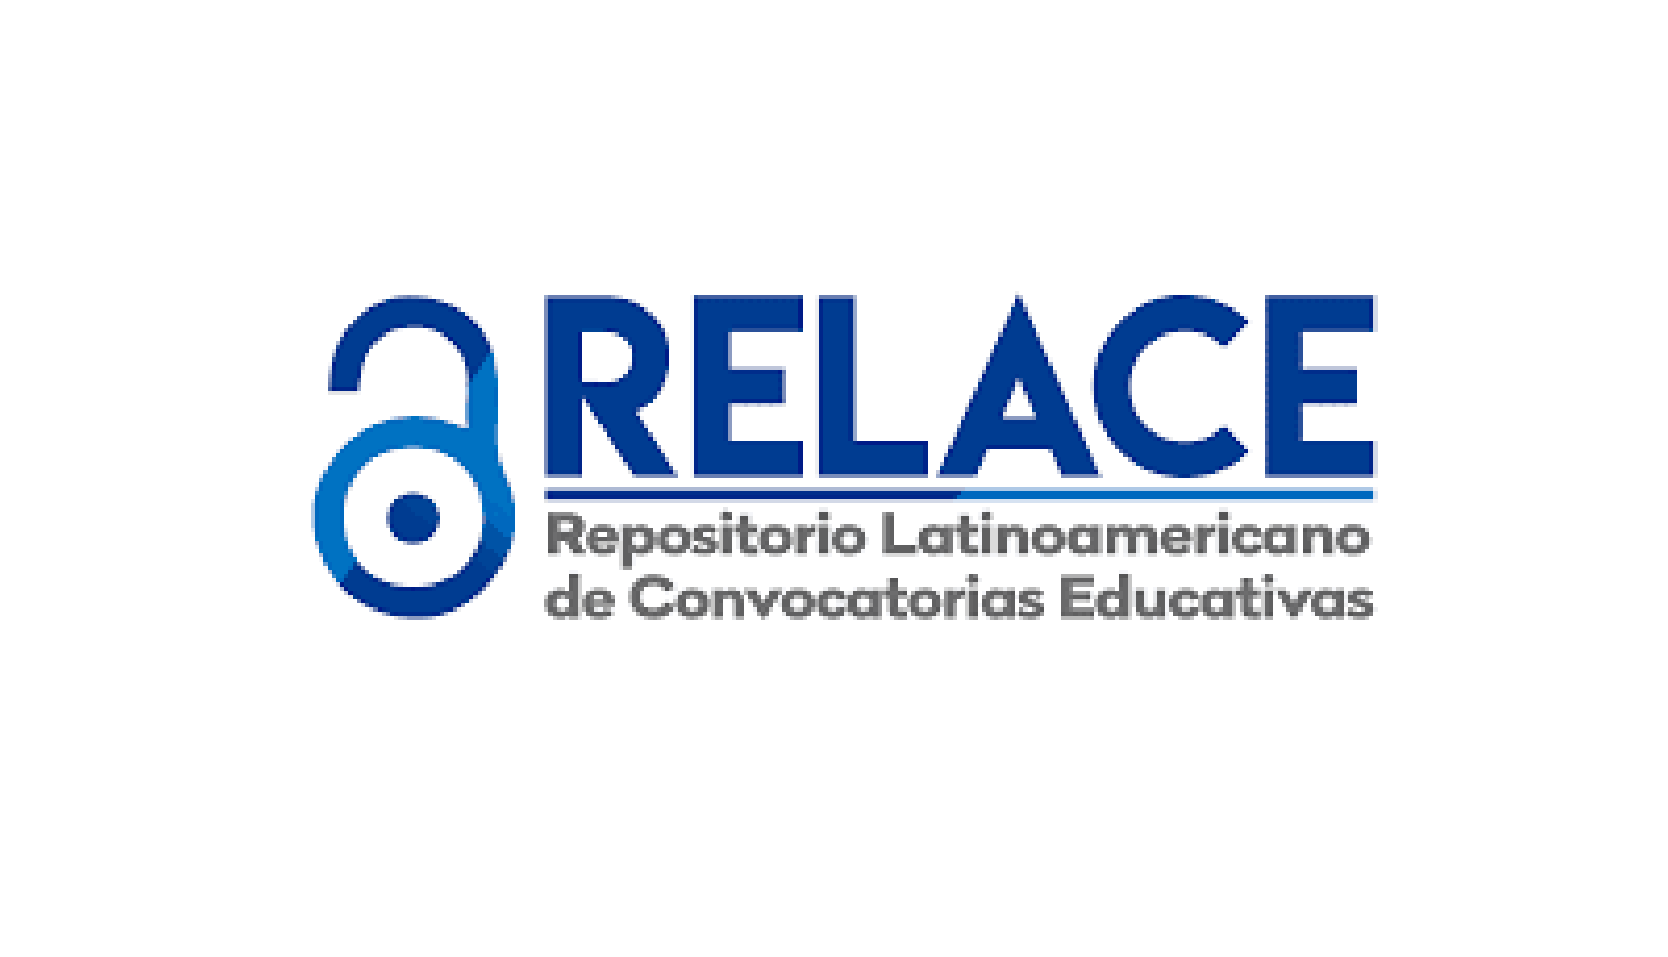 Relace